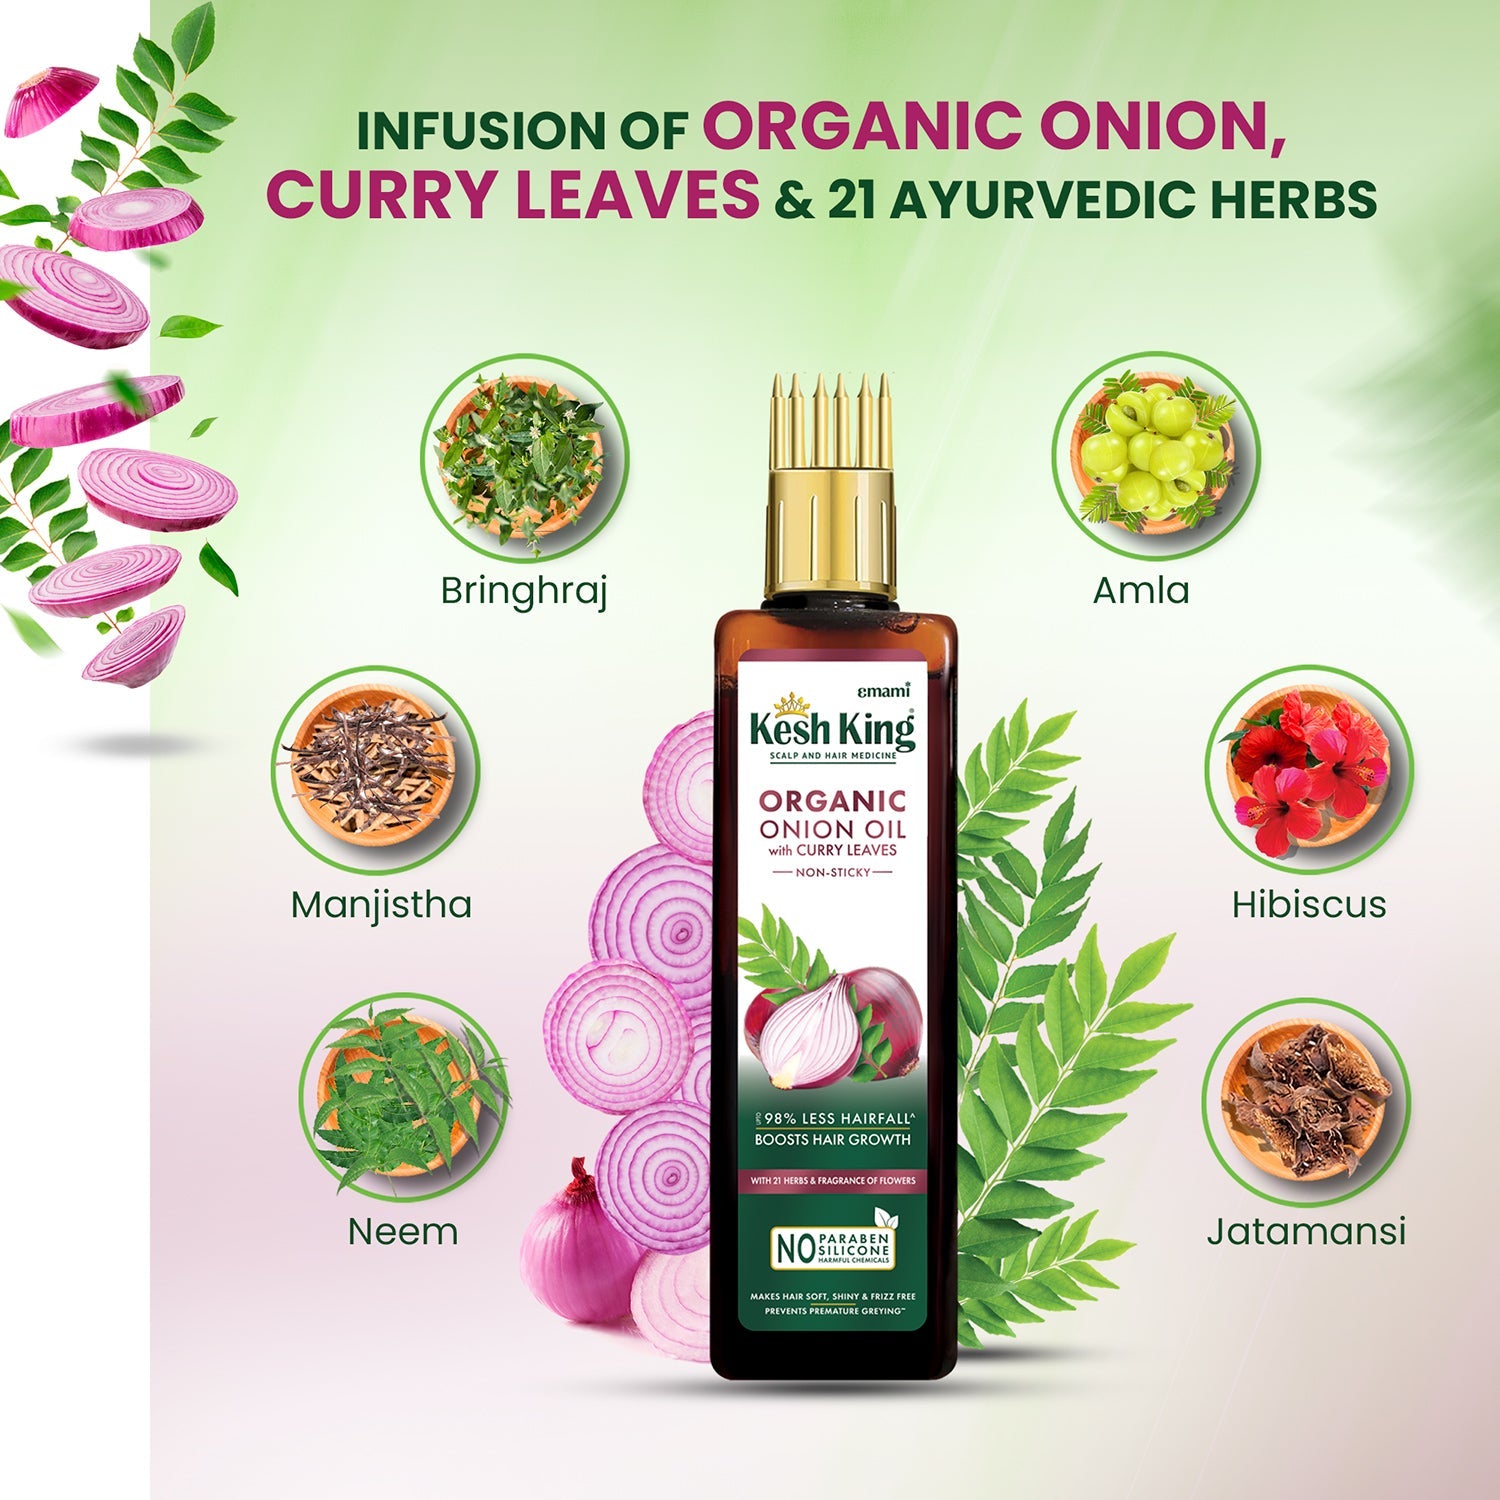 Kesh King Organic Onion Oil With Curry Leaves 200ml